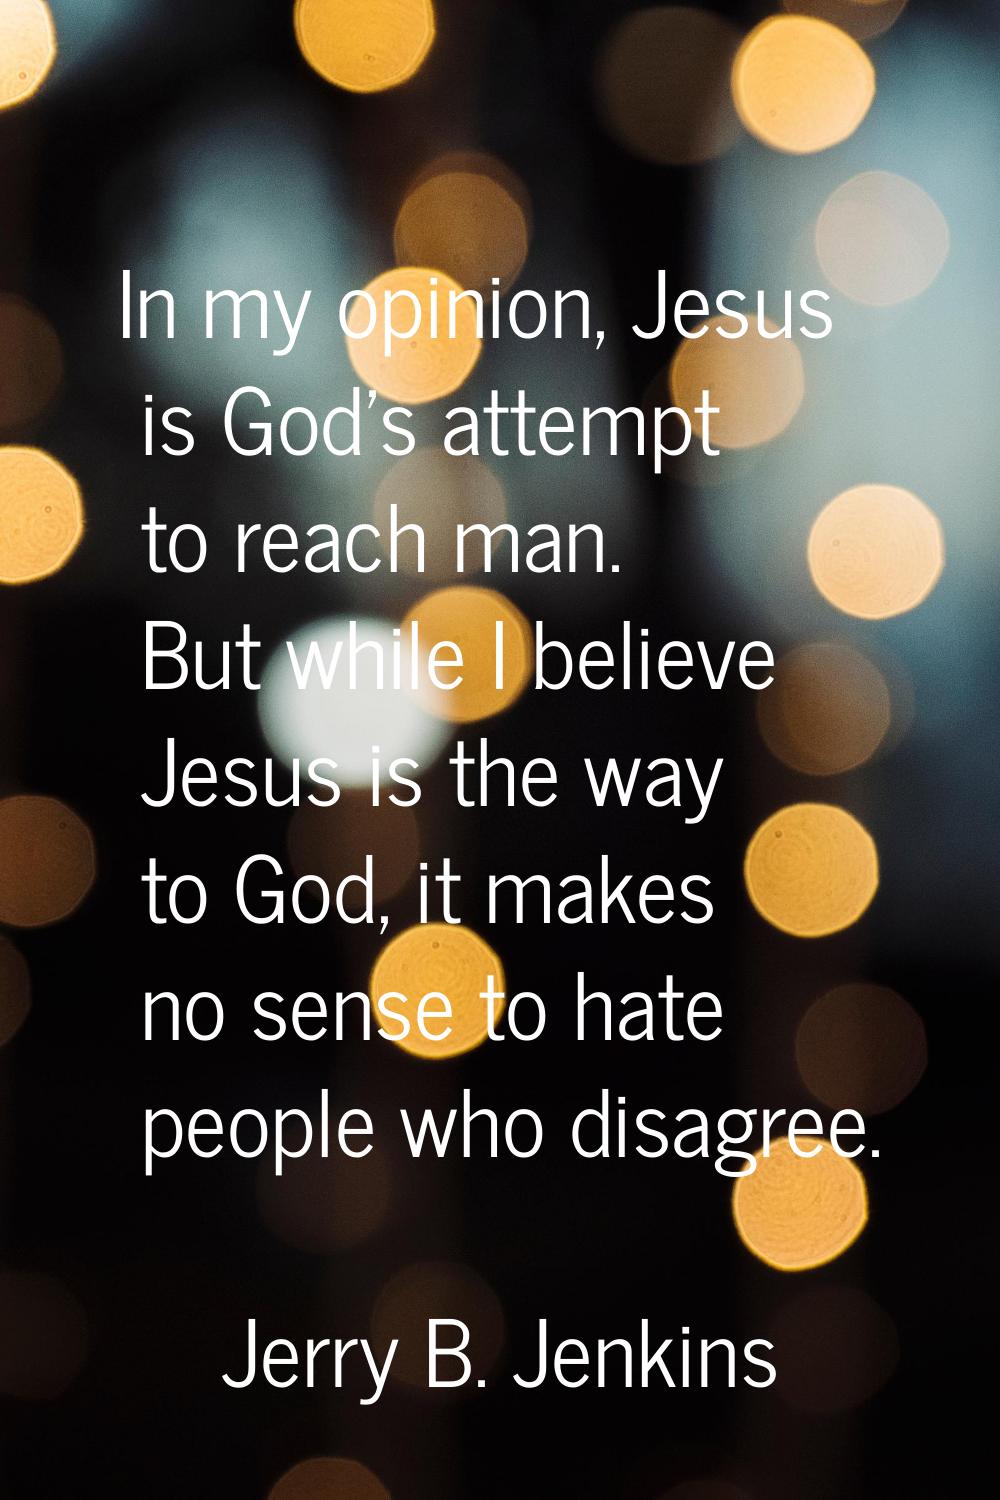 In my opinion, Jesus is God's attempt to reach man. But while I believe Jesus is the way to God, it